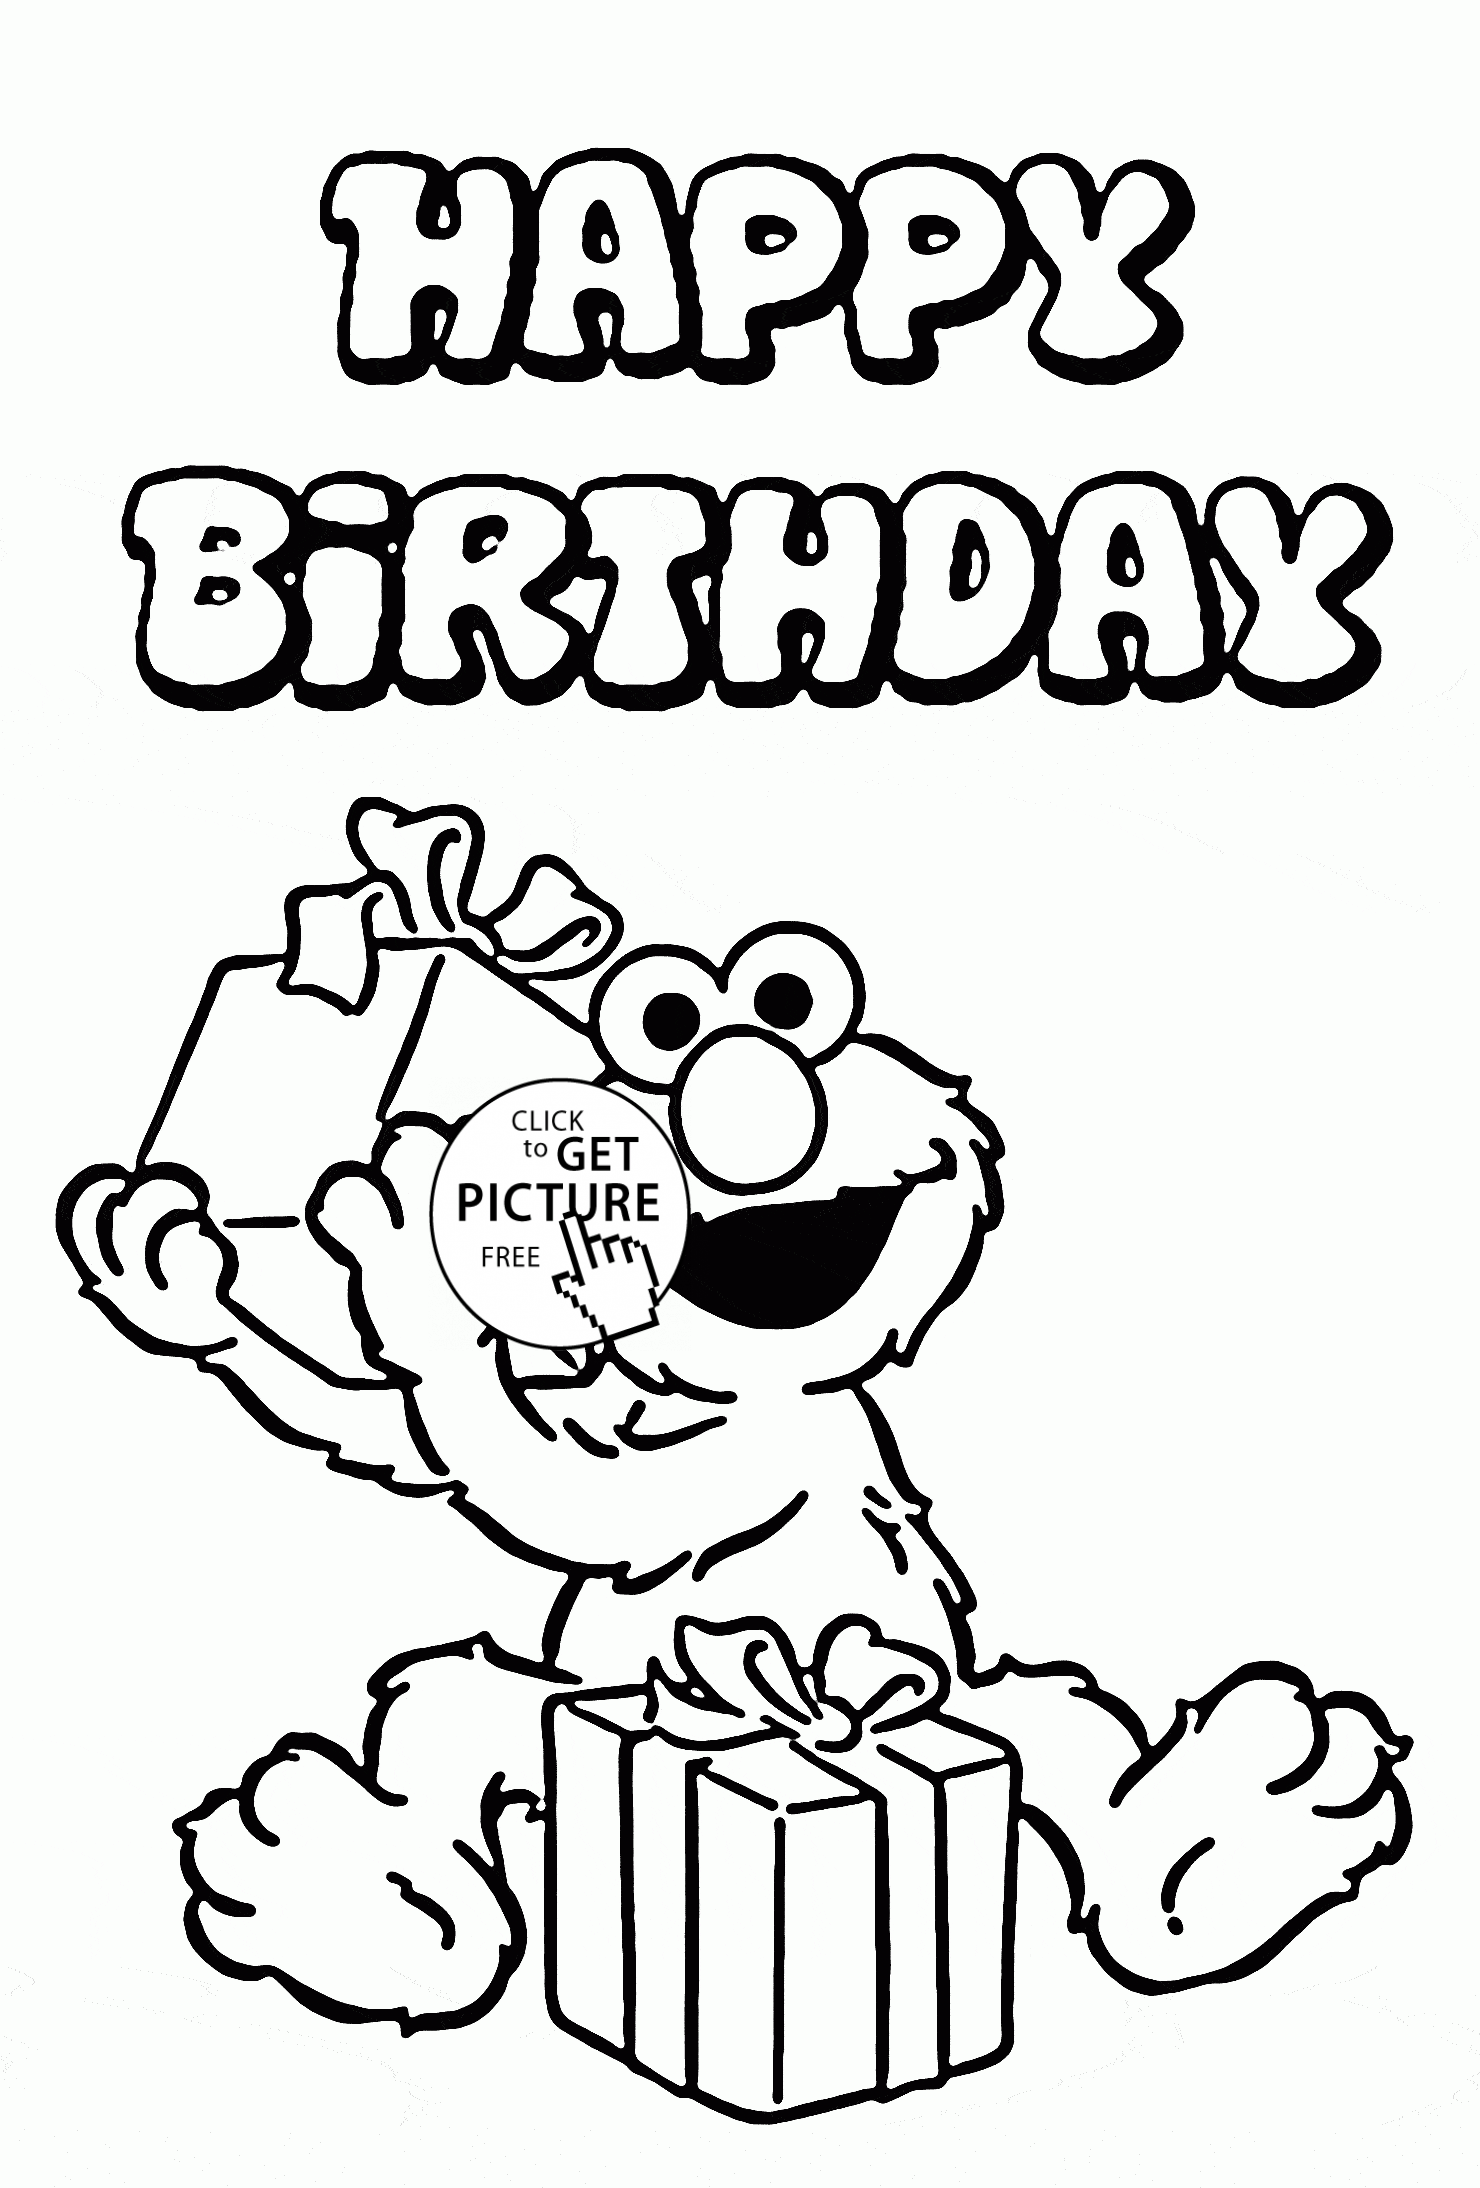 Happy Birthday with Elmo coloring page for kids, holiday coloring ...